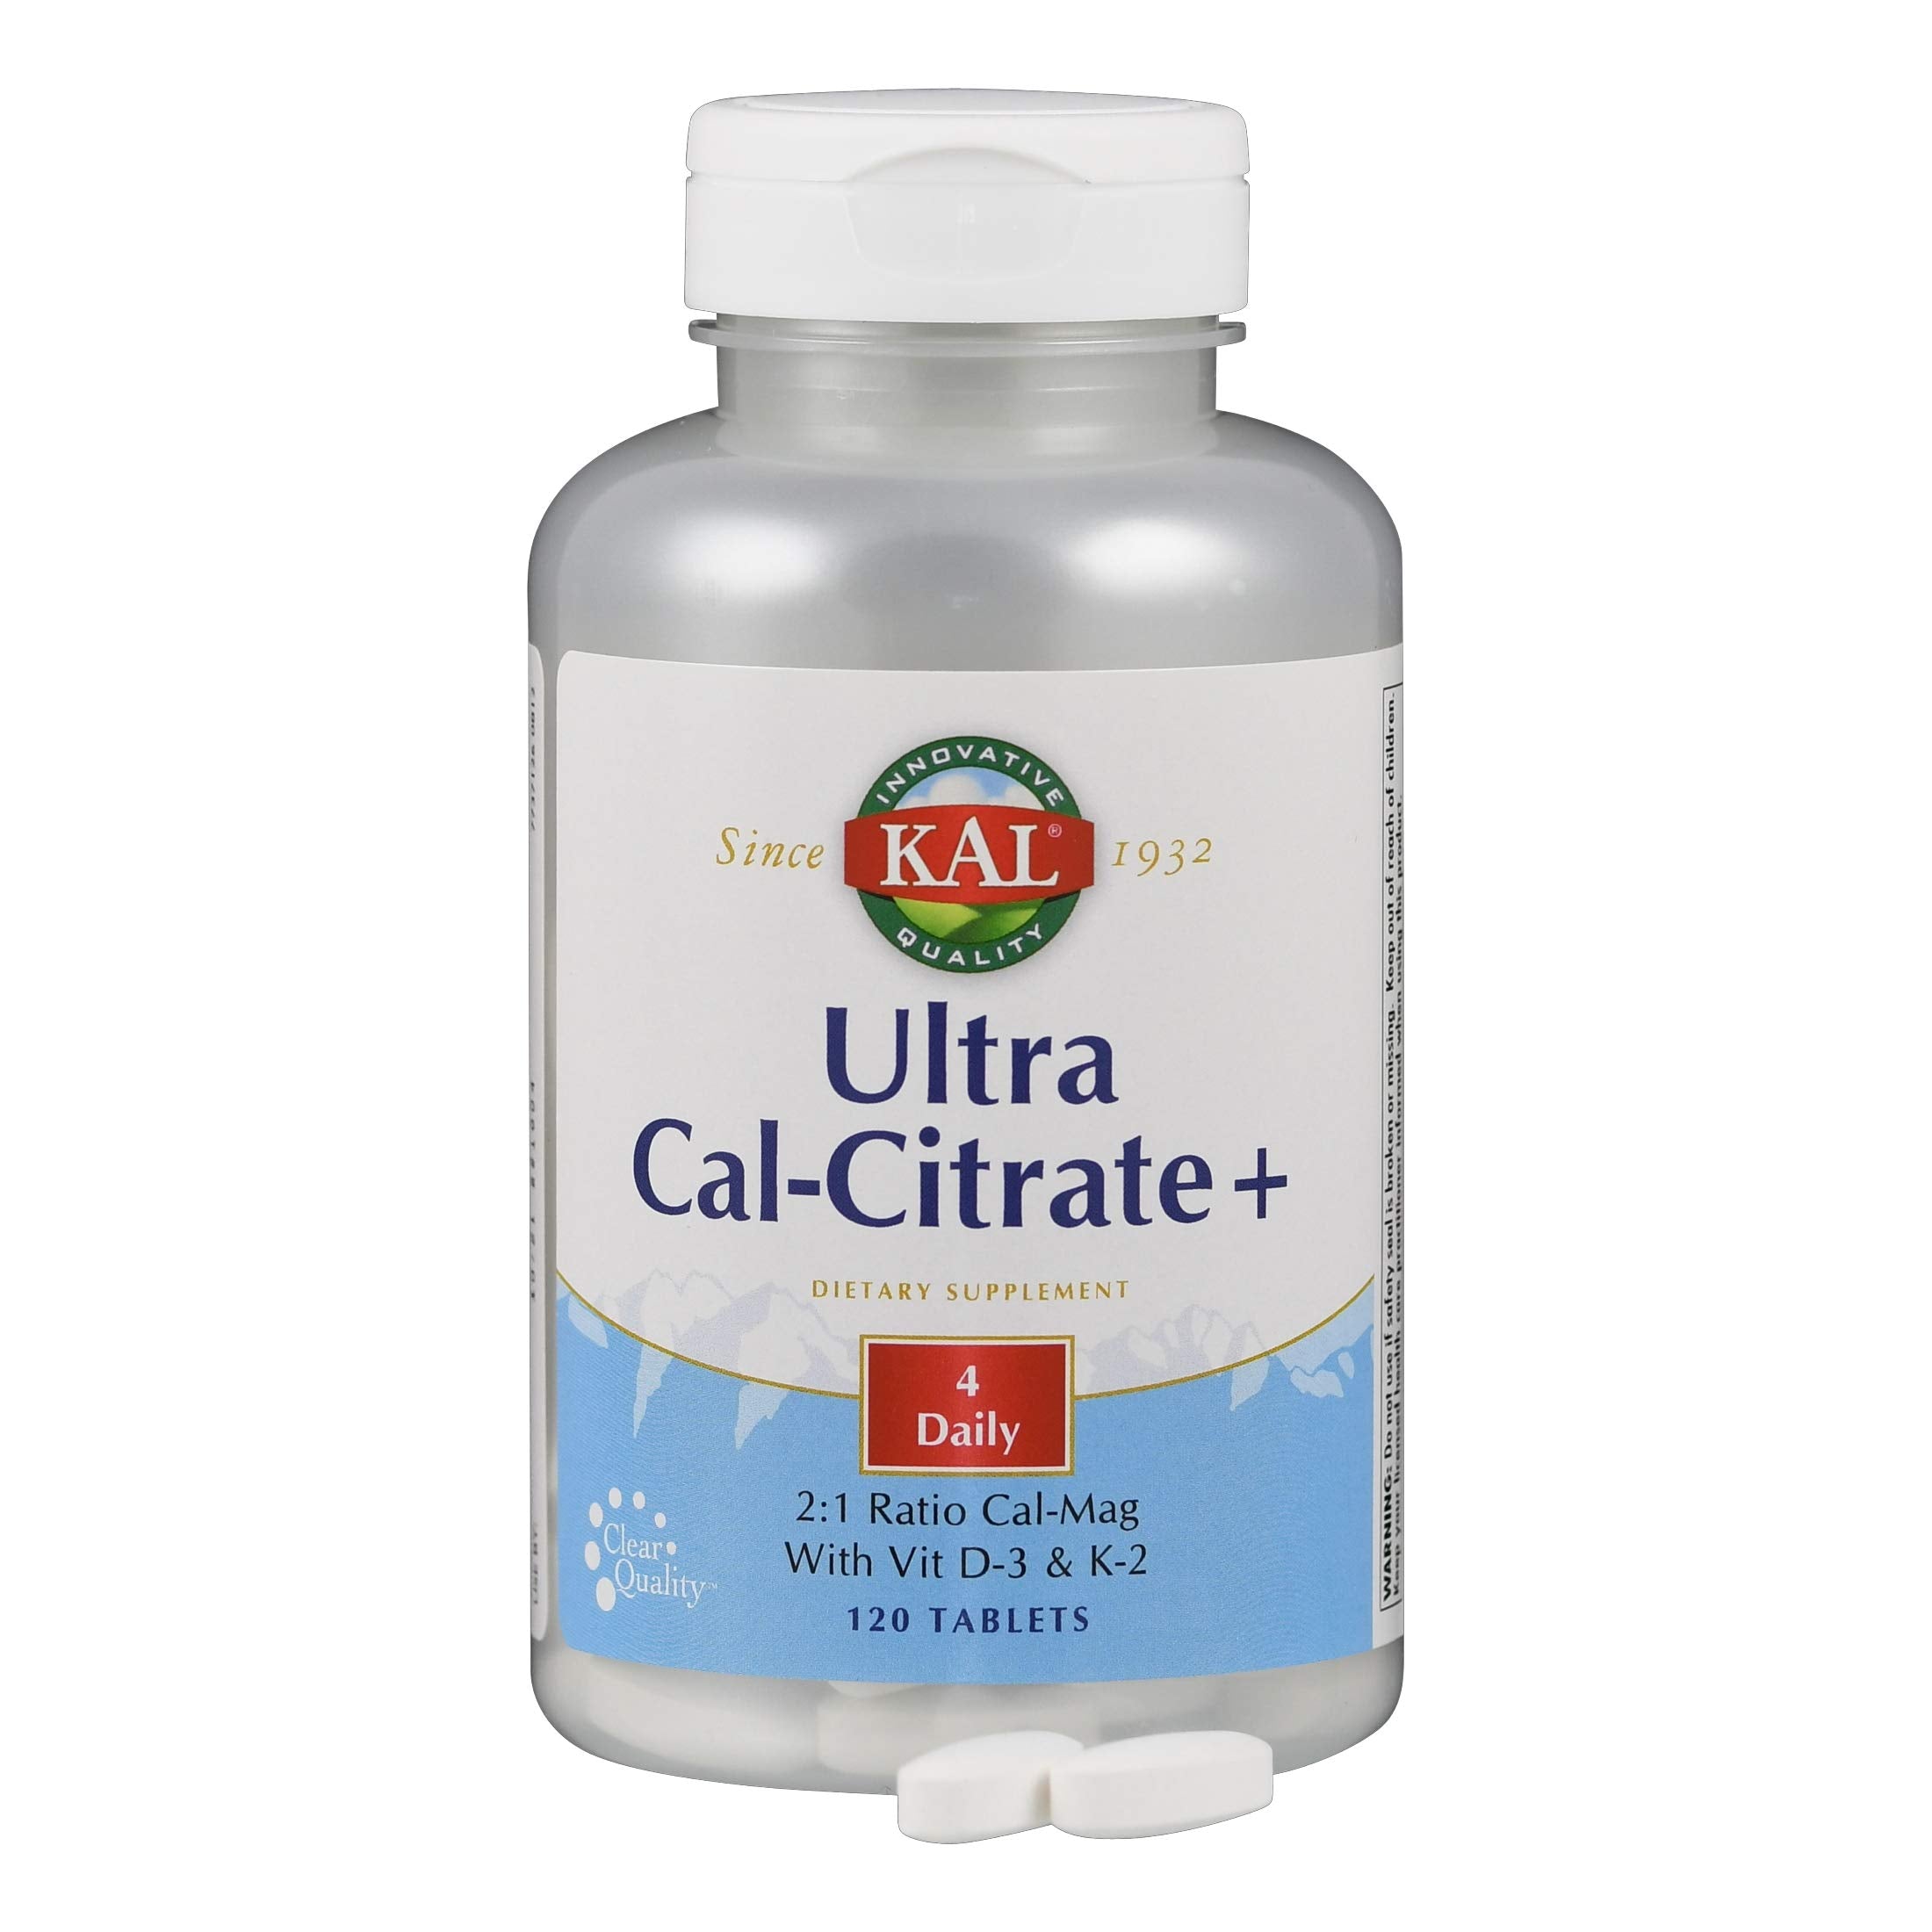 KAL UltraCal-Citrate+ 120ct Tablet